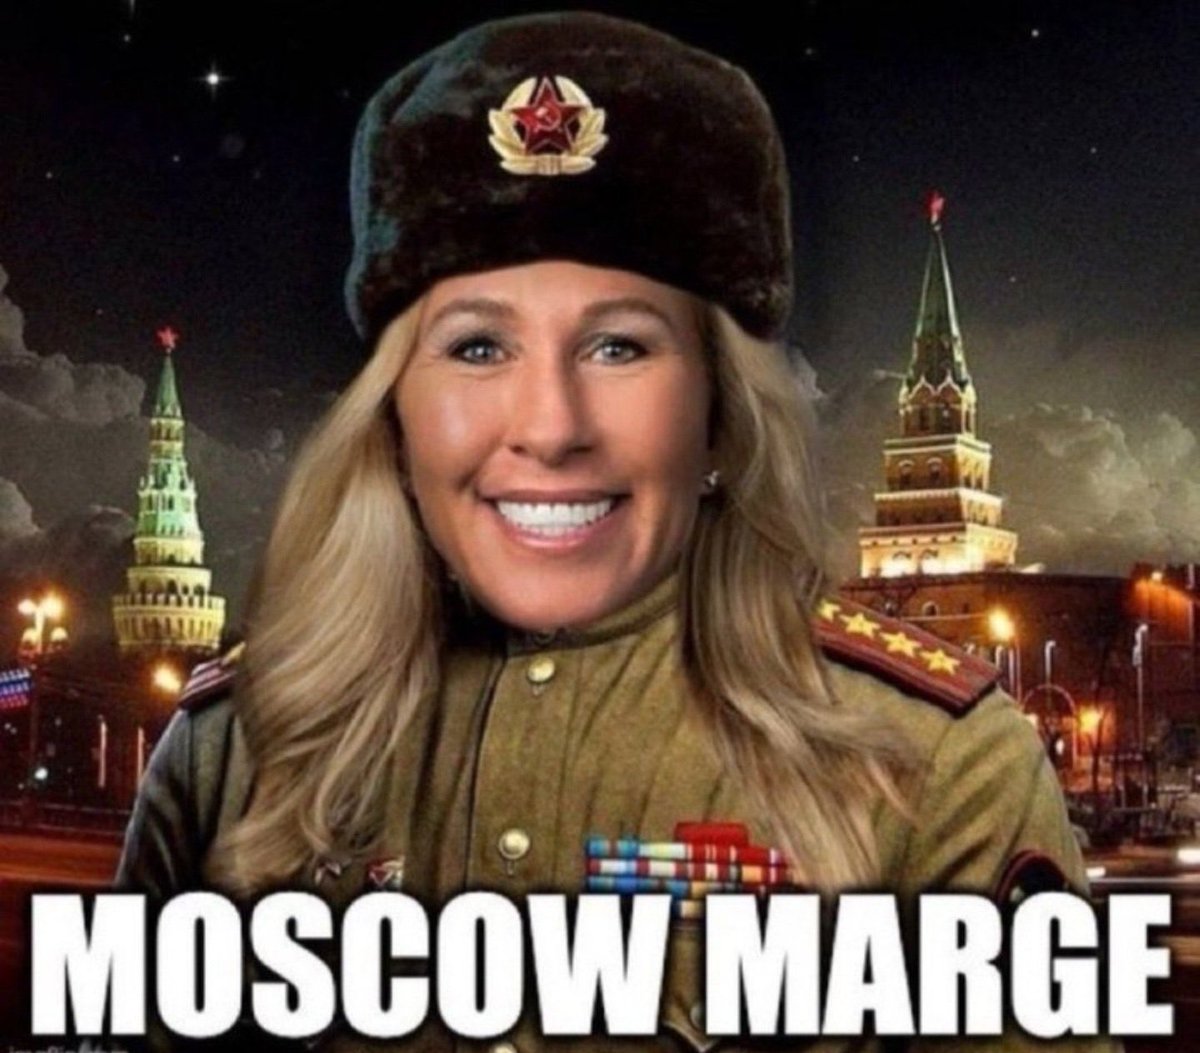 #MoscowMarge @RepMTG